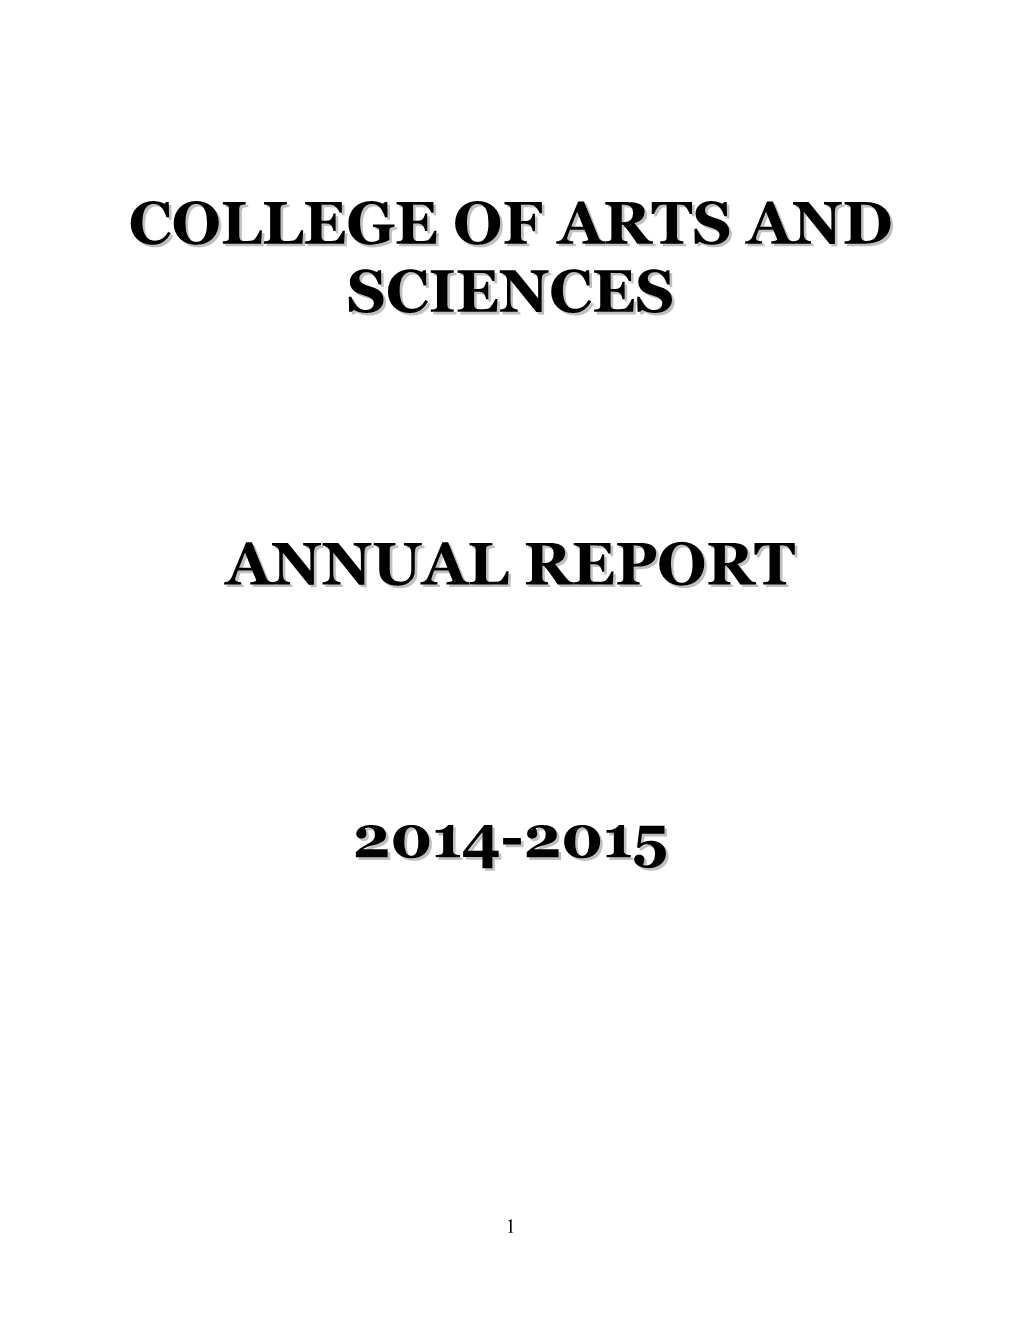 College of Arts and Sciences Annual Report 2014-2015